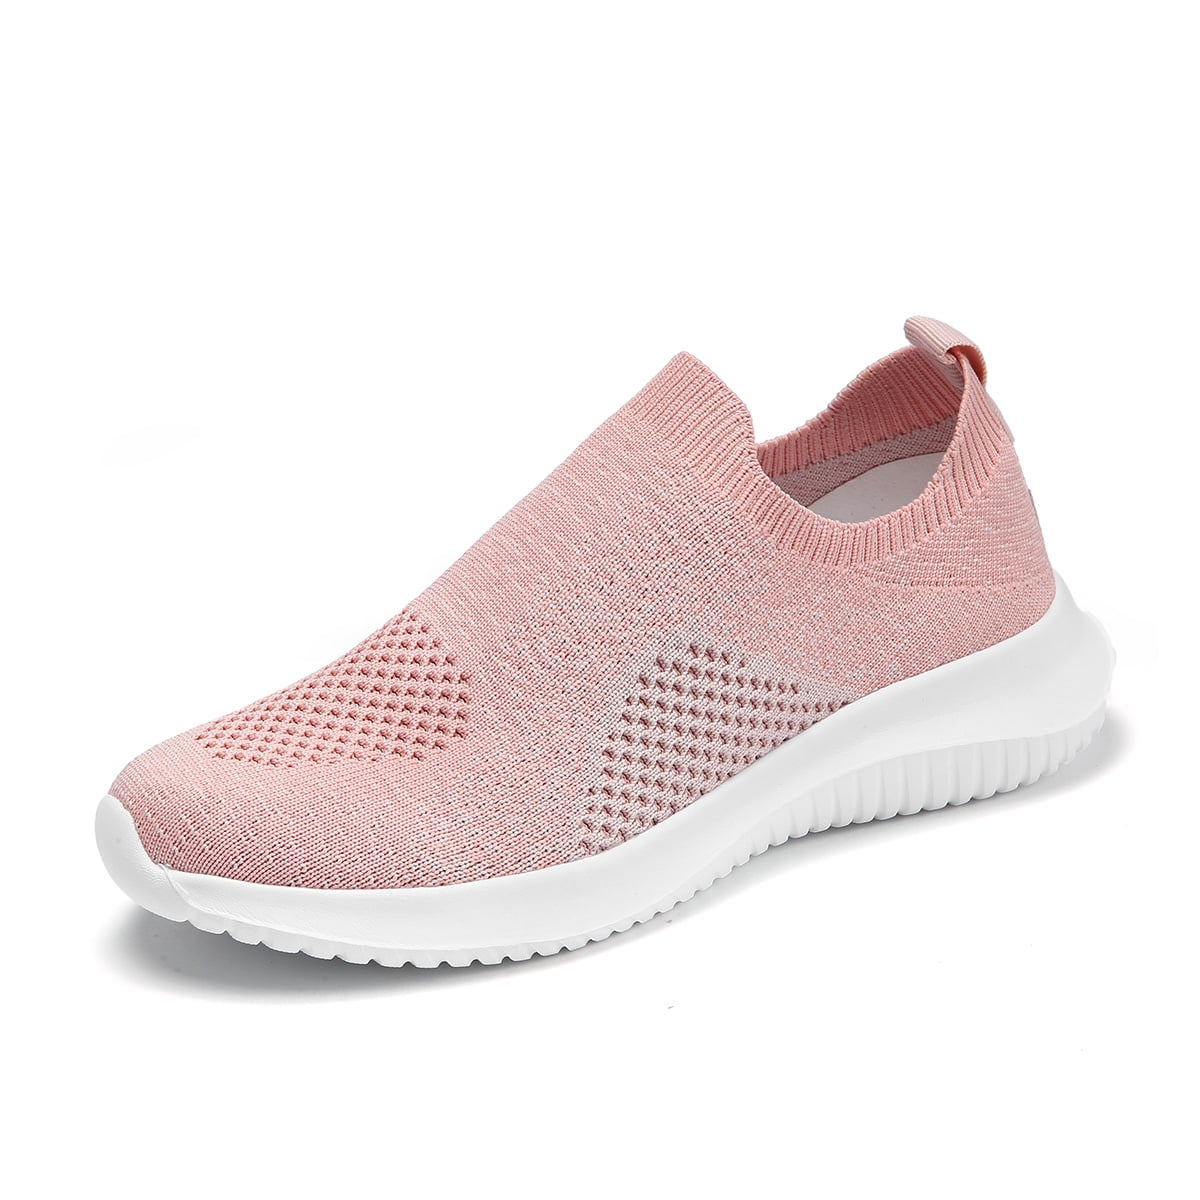 Breathable Mesh Flat Canvas Sneakers Lightweight Comfort Low Cut Shoes for Tennis Running Casual Gym Women Knitted Walking Shoes